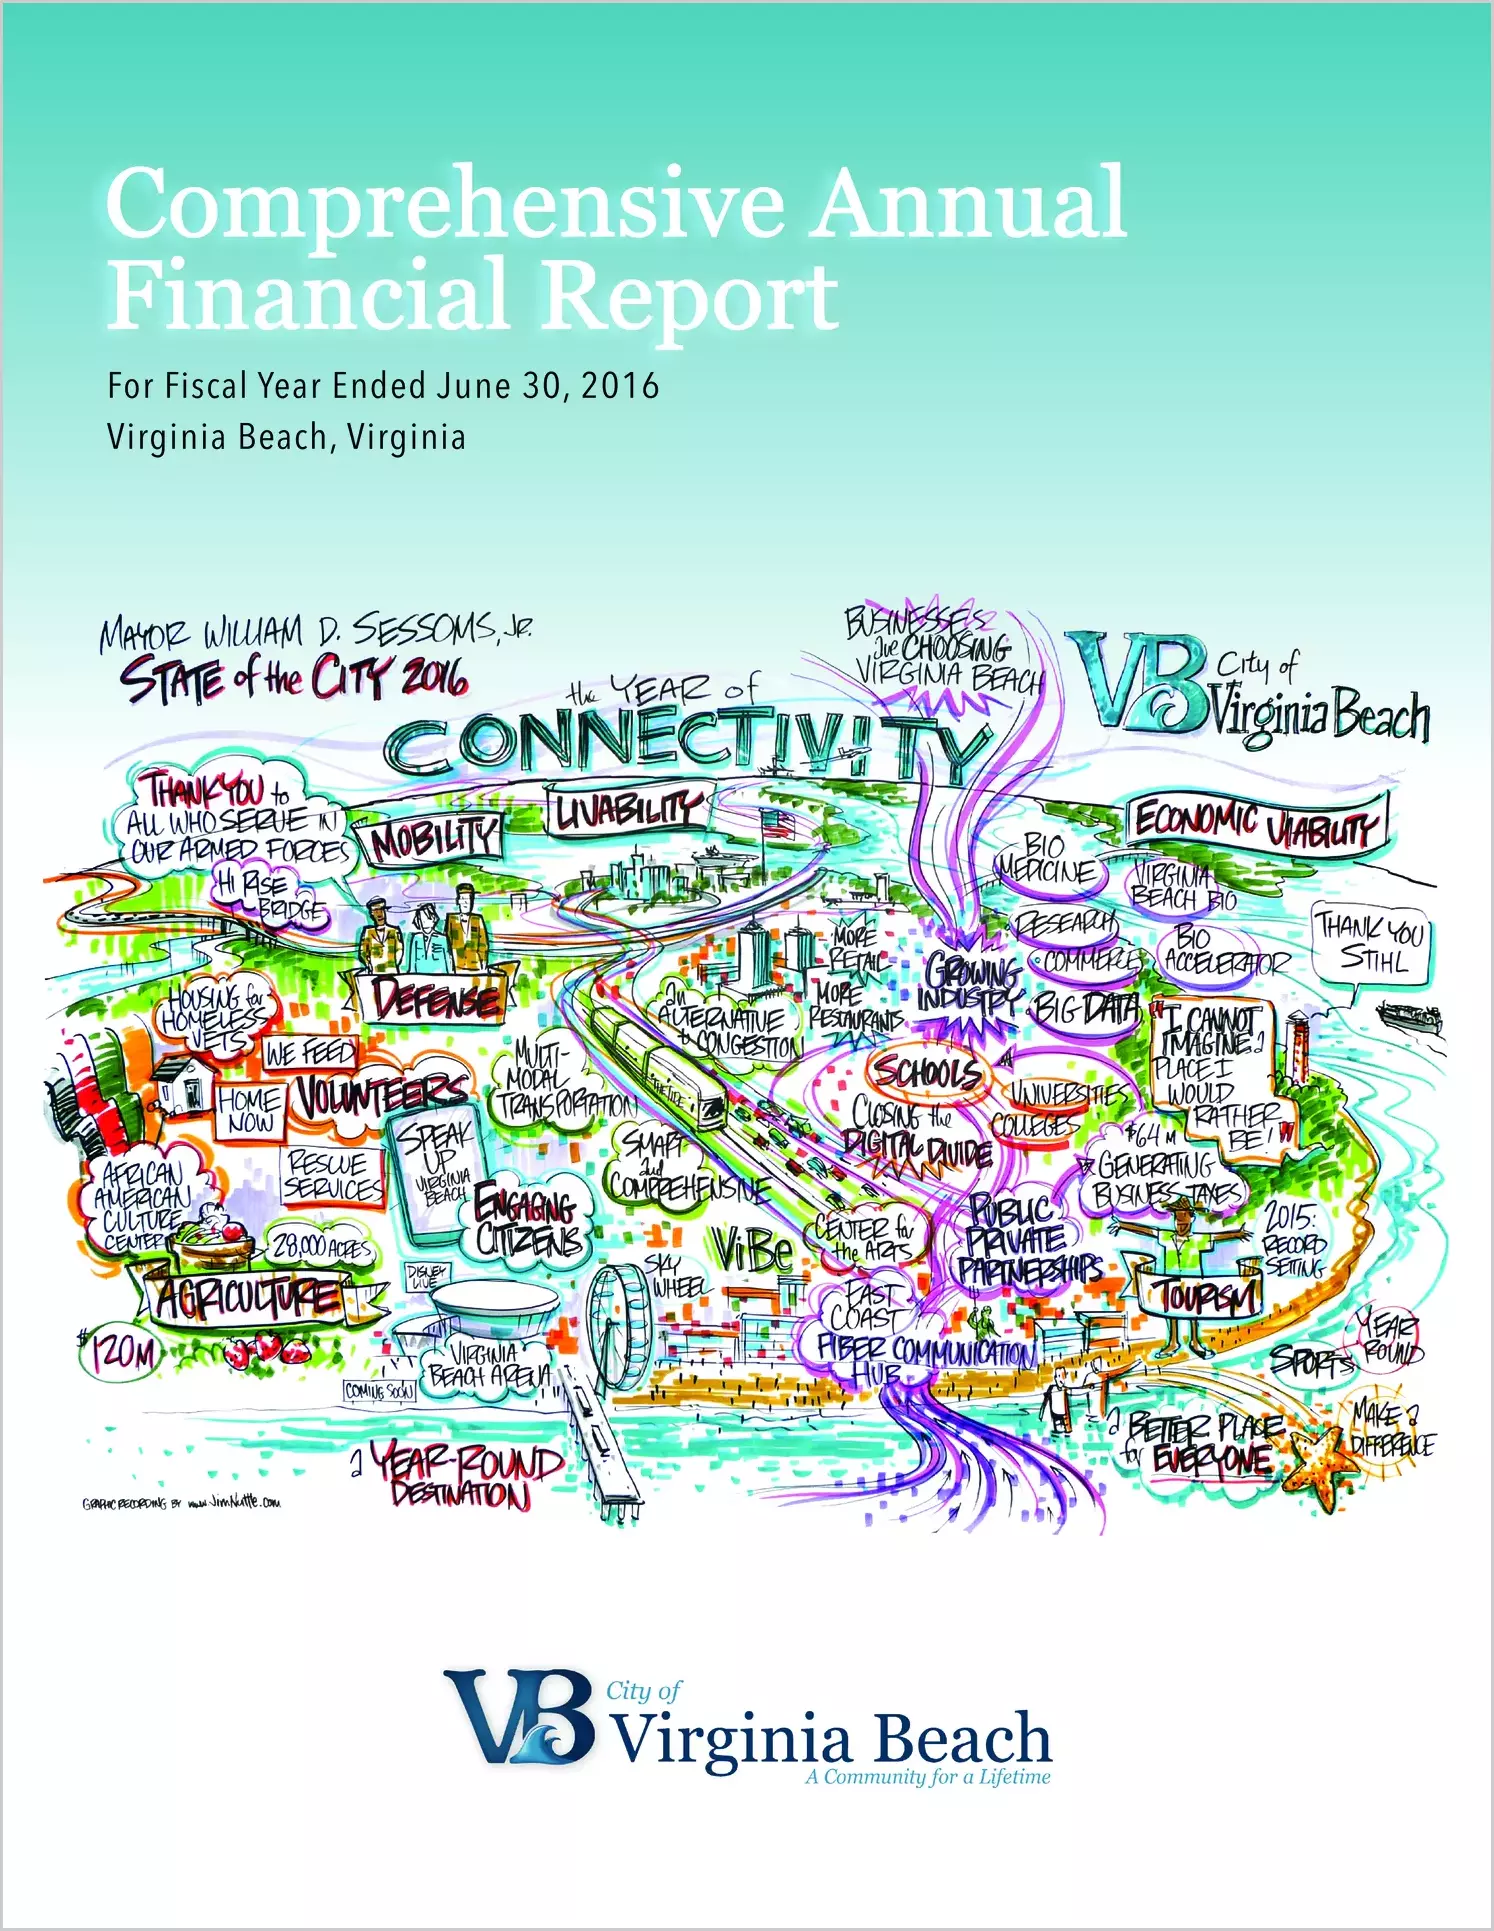 2016 Annual Financial Report for City of Virginia Beach